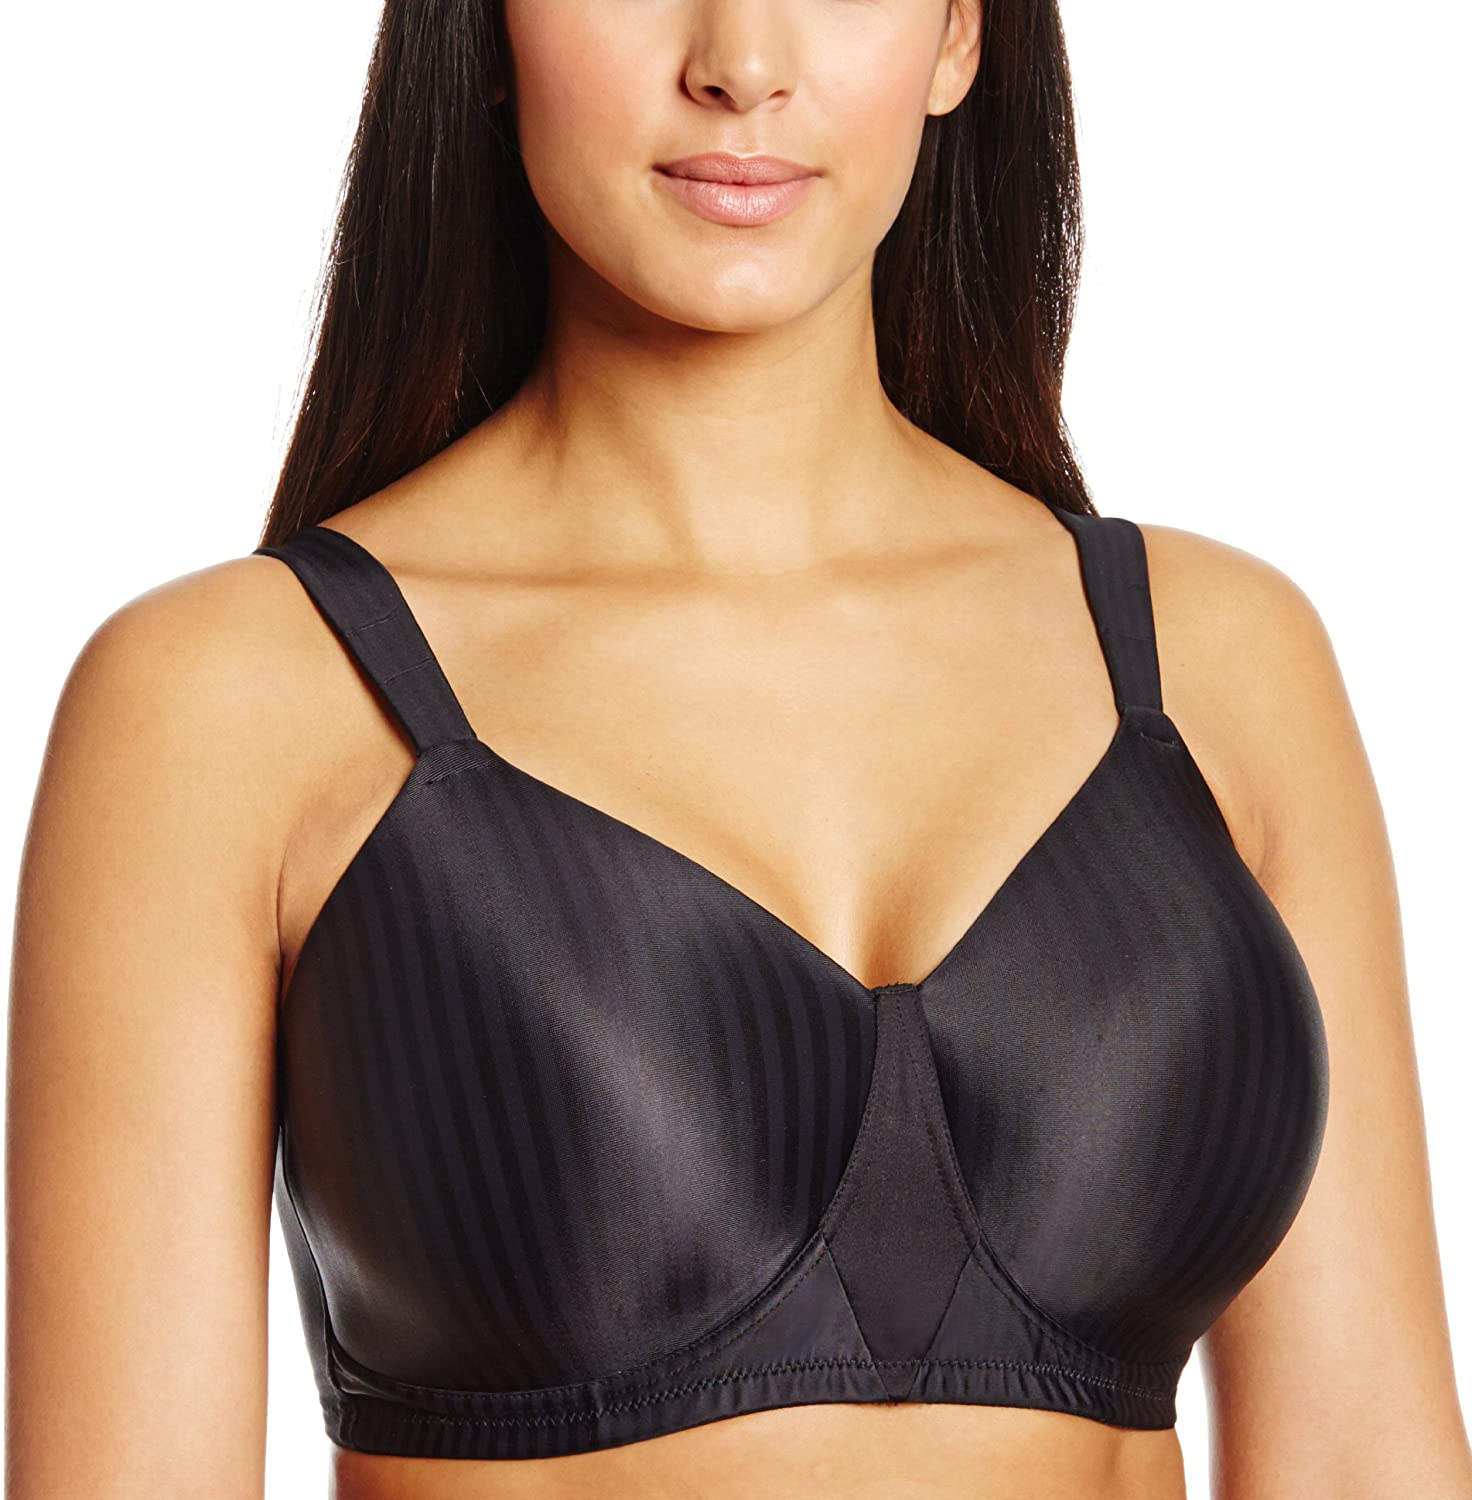 Playtex Women's Secrets Perfectly Smooth Underwire Full Coverage